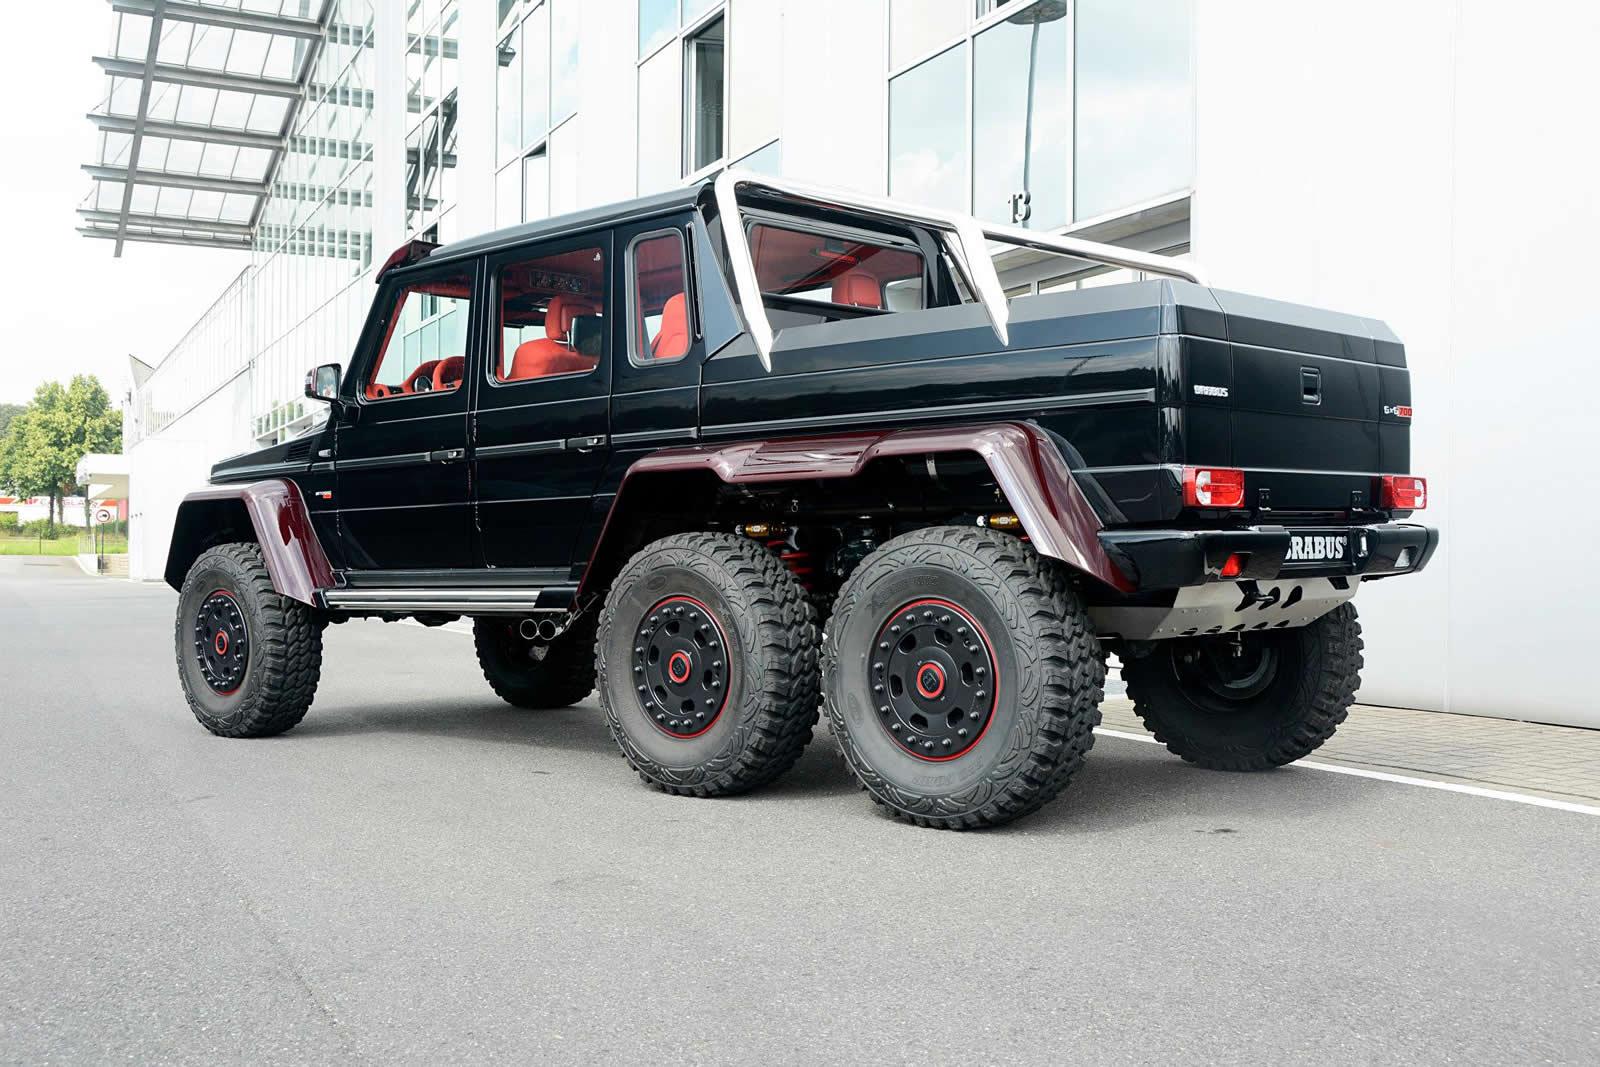 brabus-mercedes-benz-g63-amg-6x6-now-sports-red-carbon-fiber-goes-to-the-middle-east-photo-gallery_1